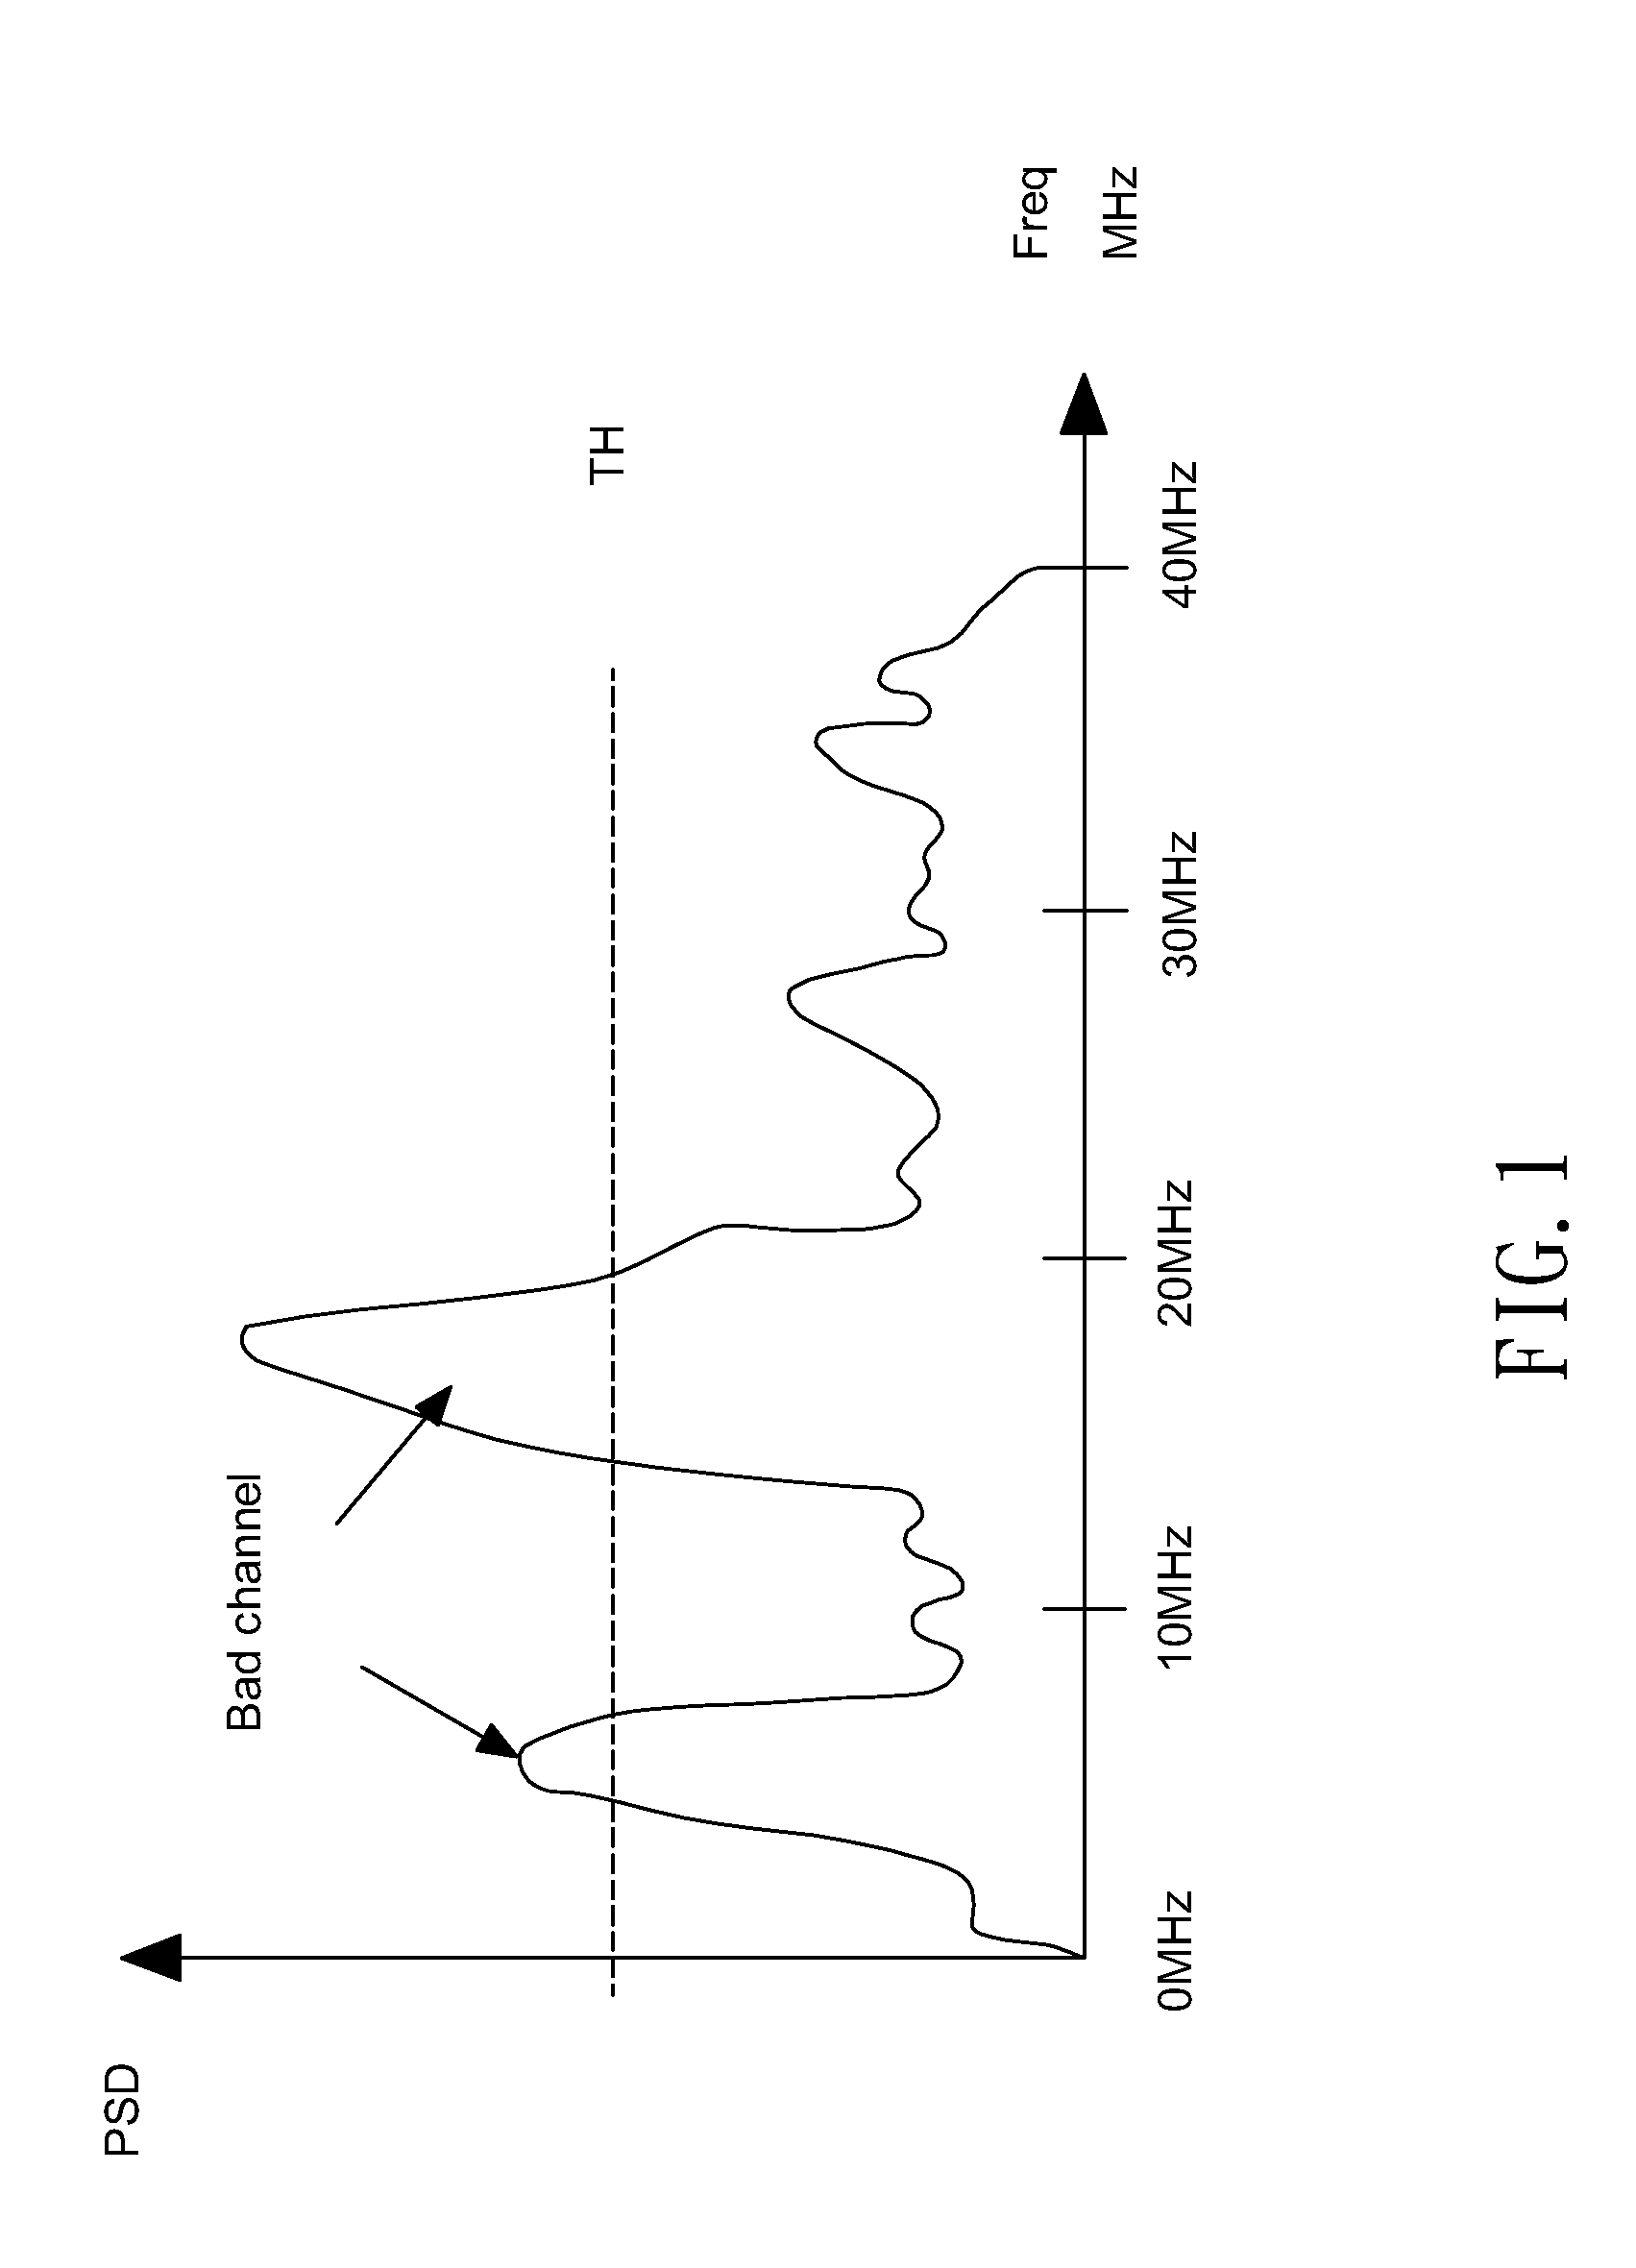 Method and Device for Implementation of Adaptive Frequency Hopping by Power Spectral Density